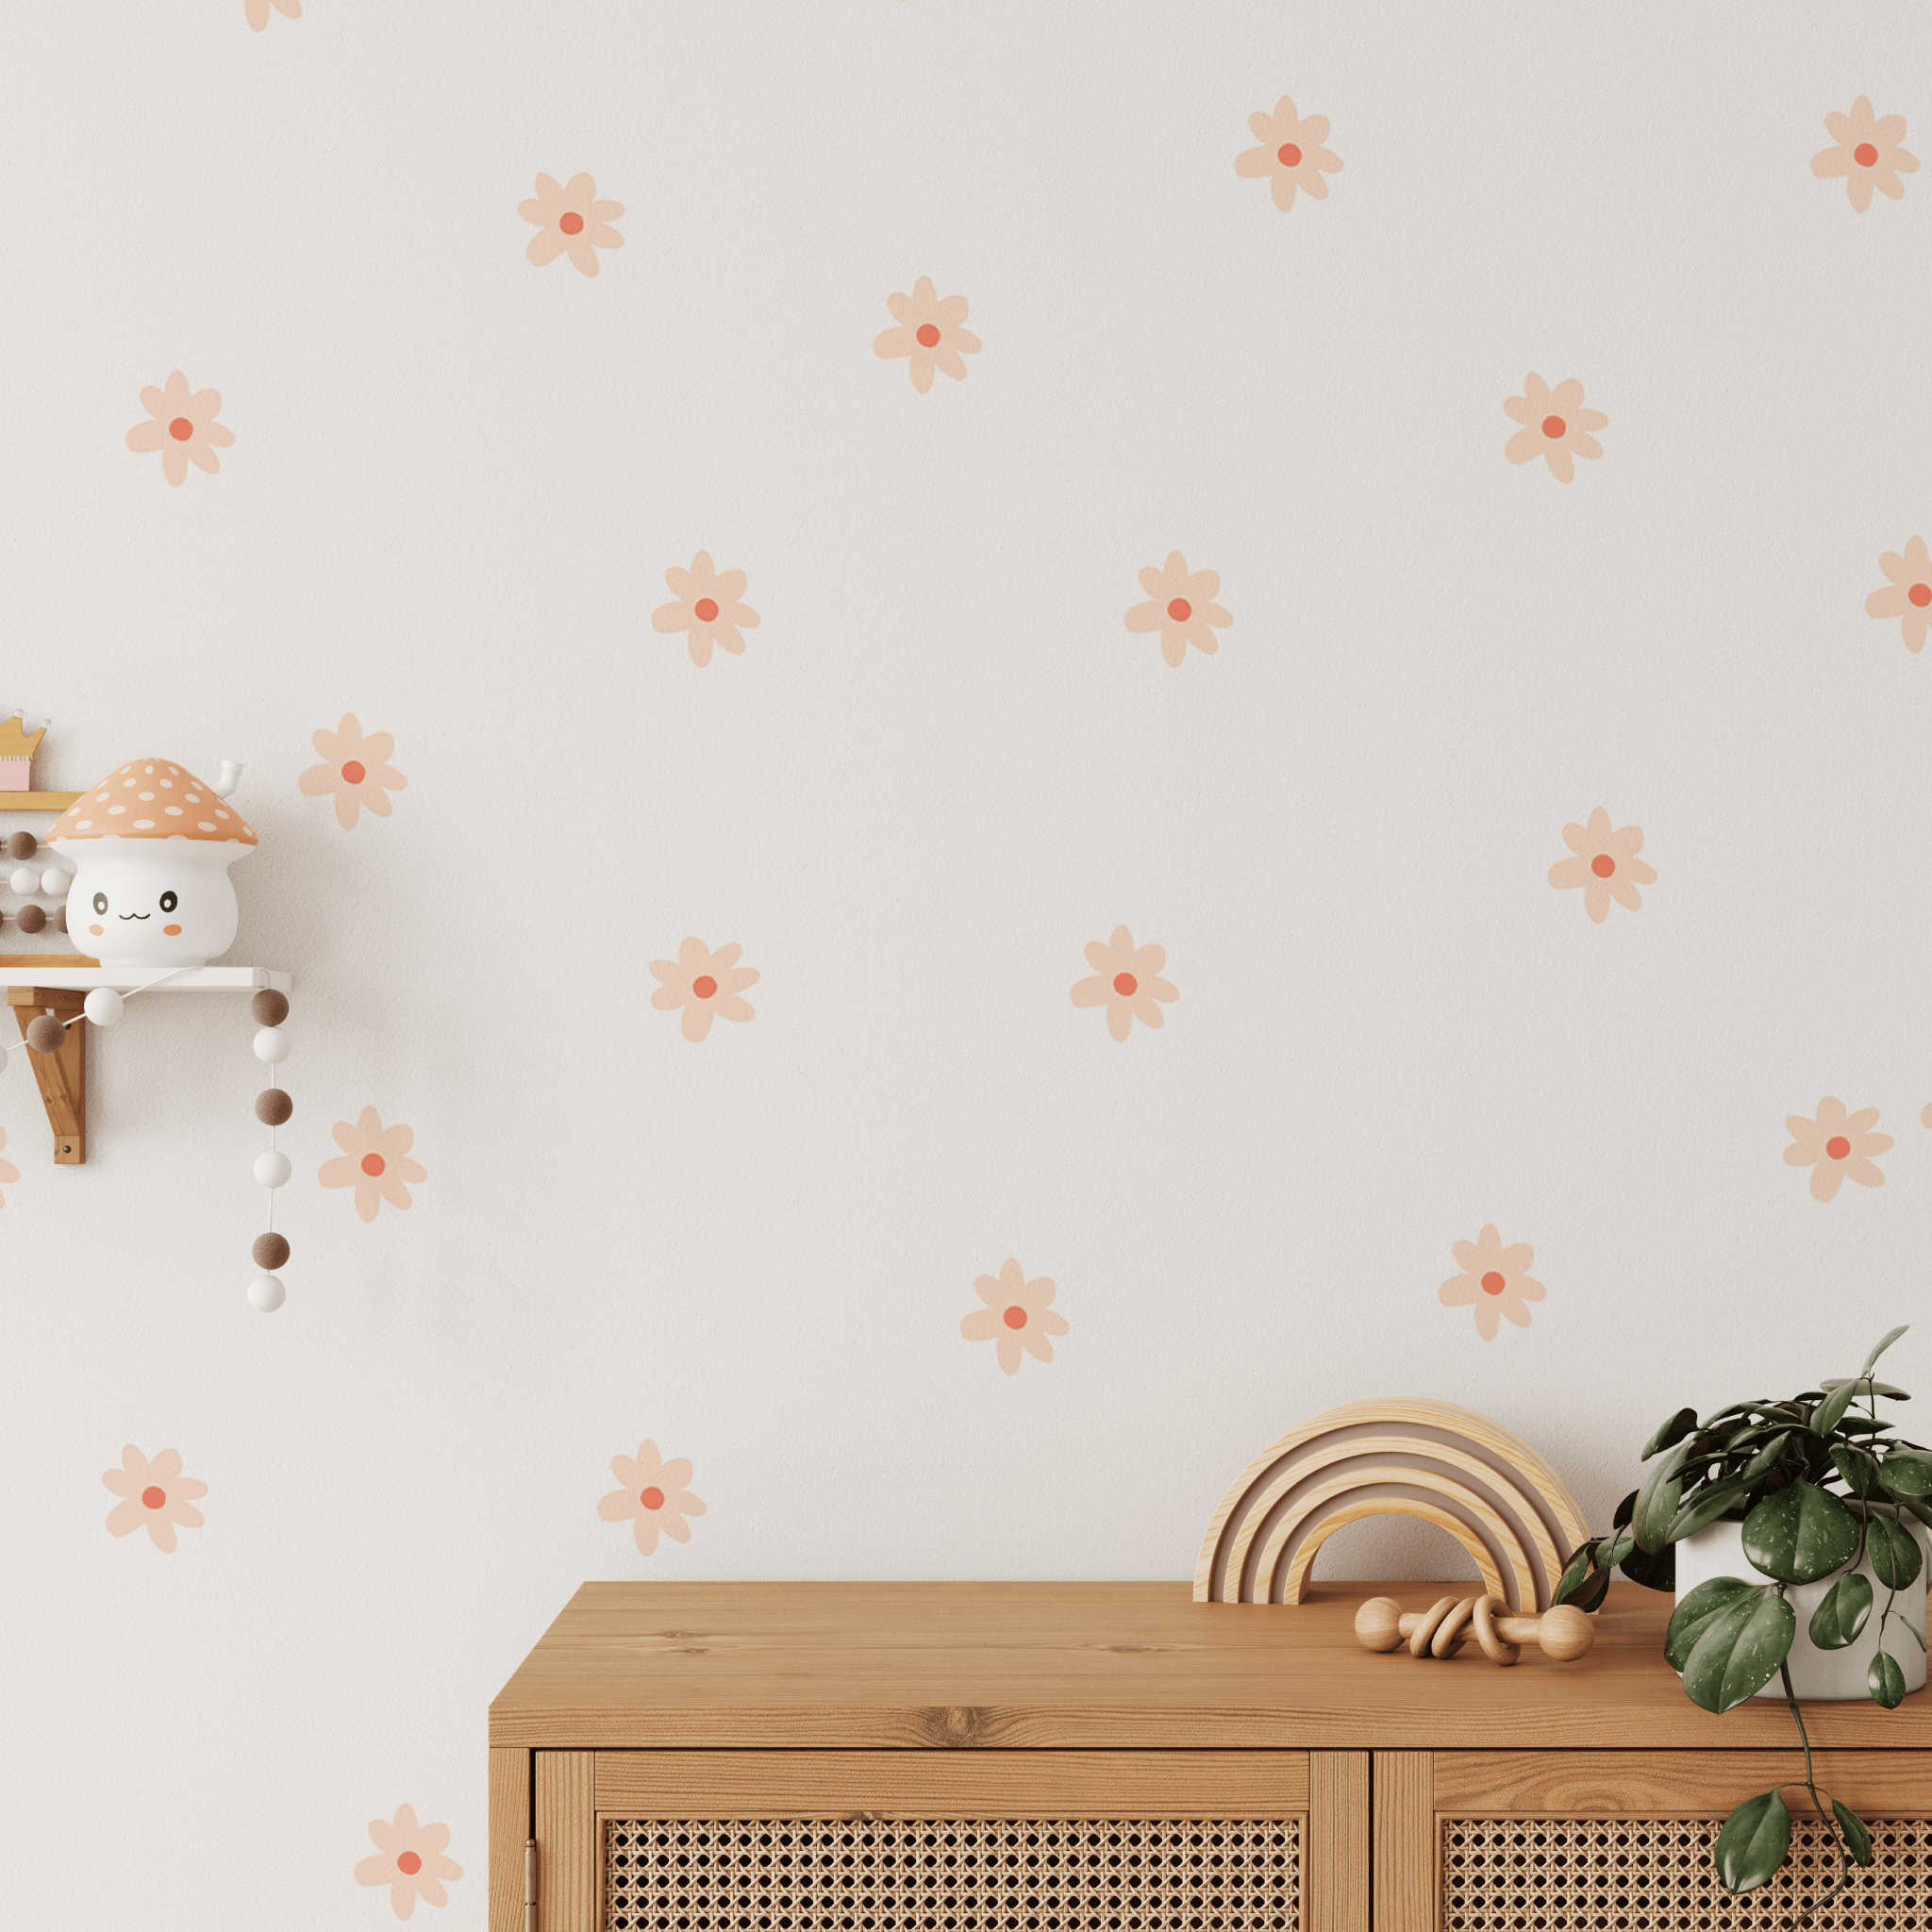 Small daisy wall stickers placed behind a wood dresser and decorated with kid's toys